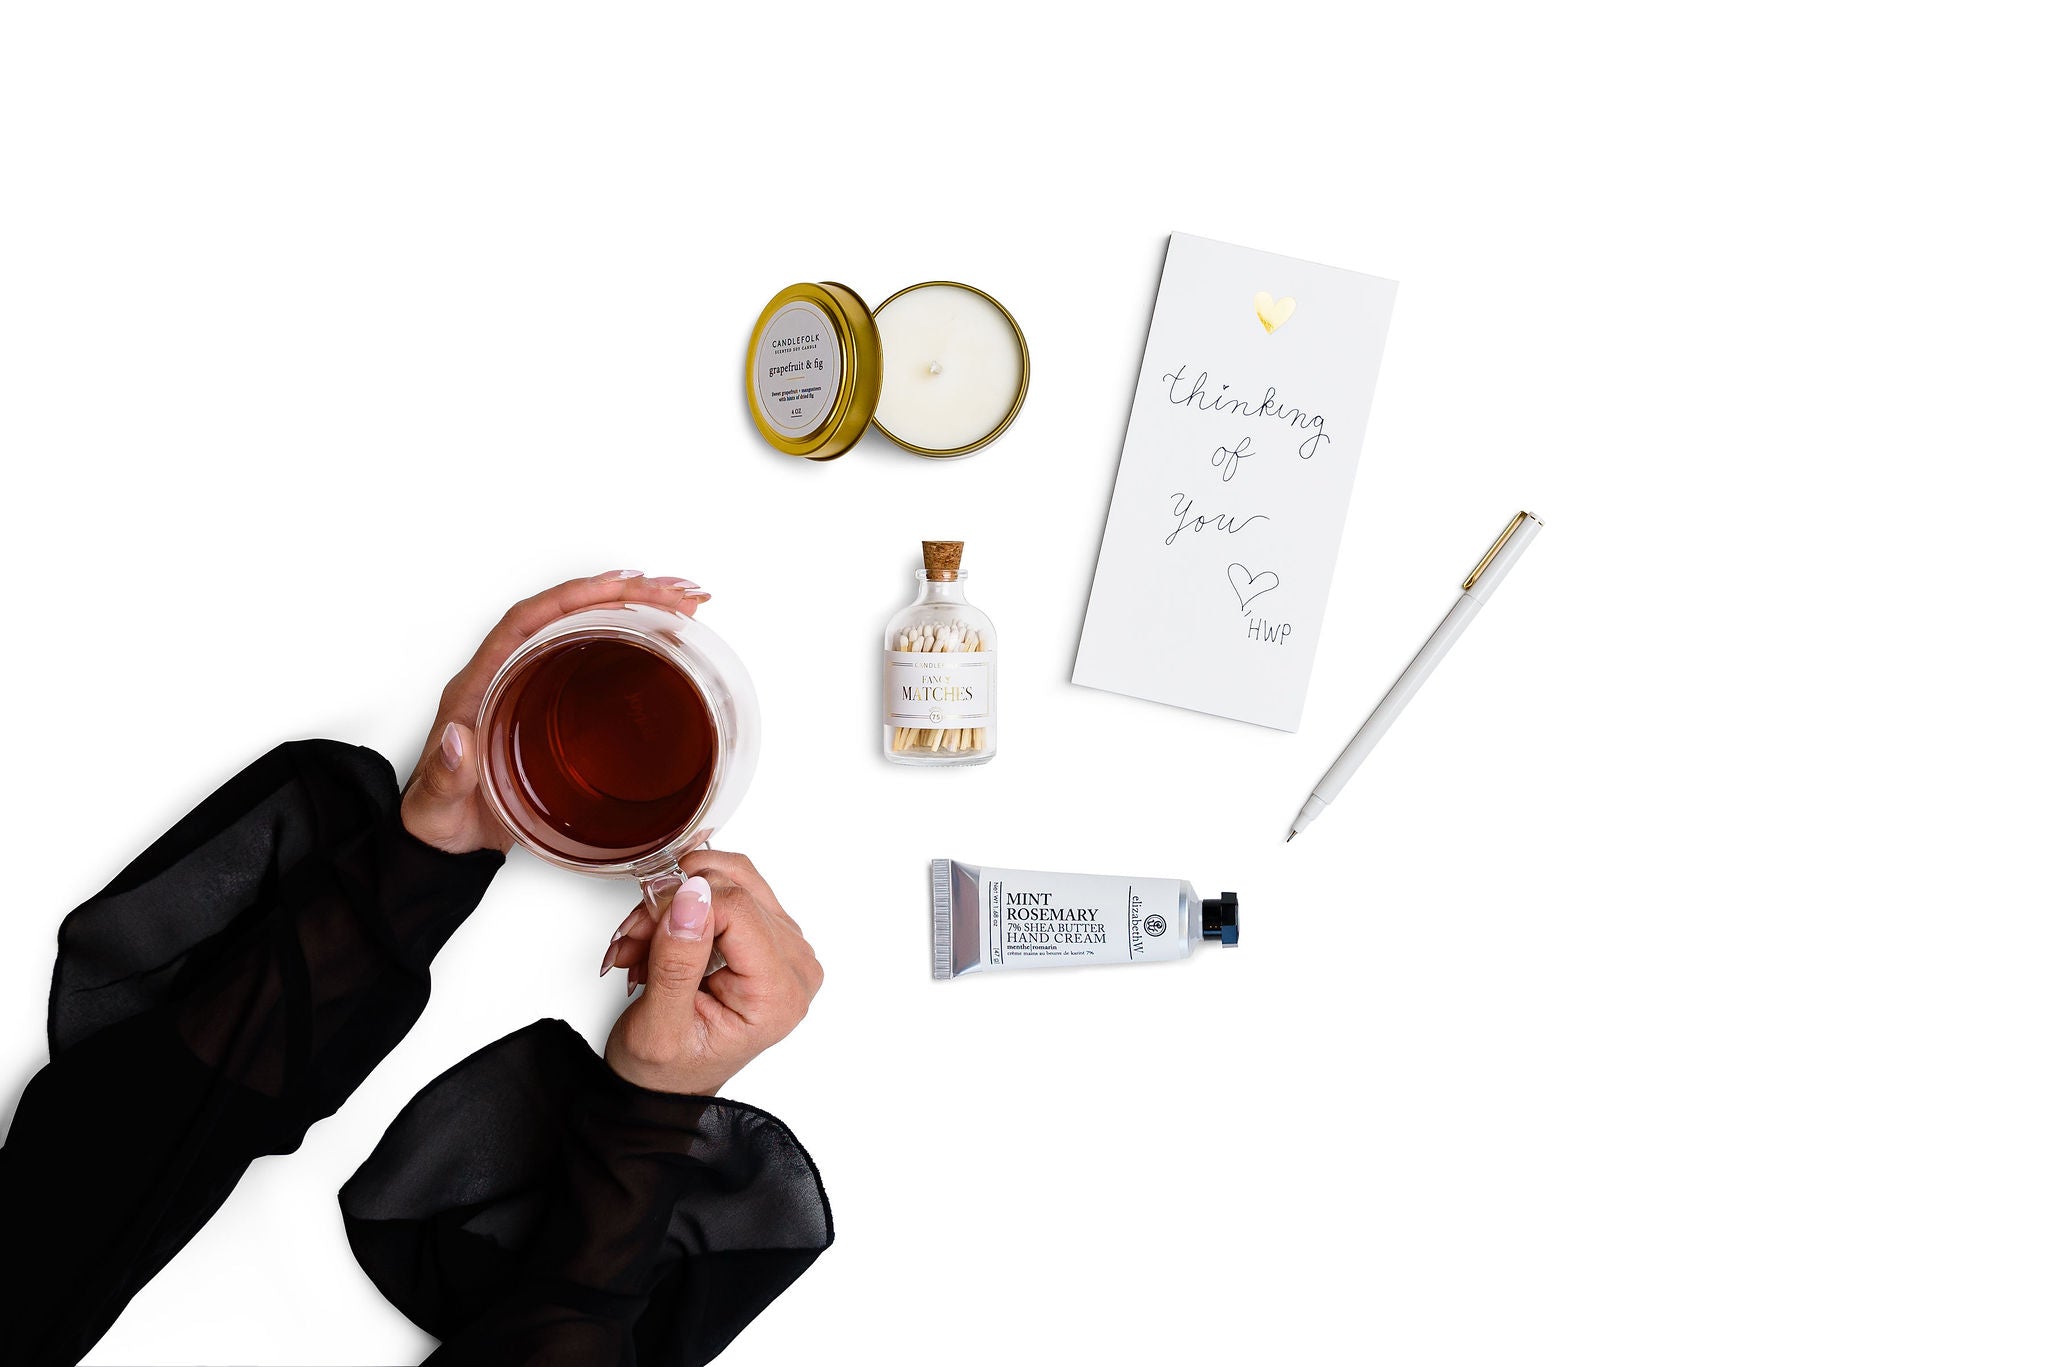 hands holding a glass cup fith tea, open candle with golden lid on top, matches jar, hands cream, white open pen, notepad with thinking oh you wirtten on it